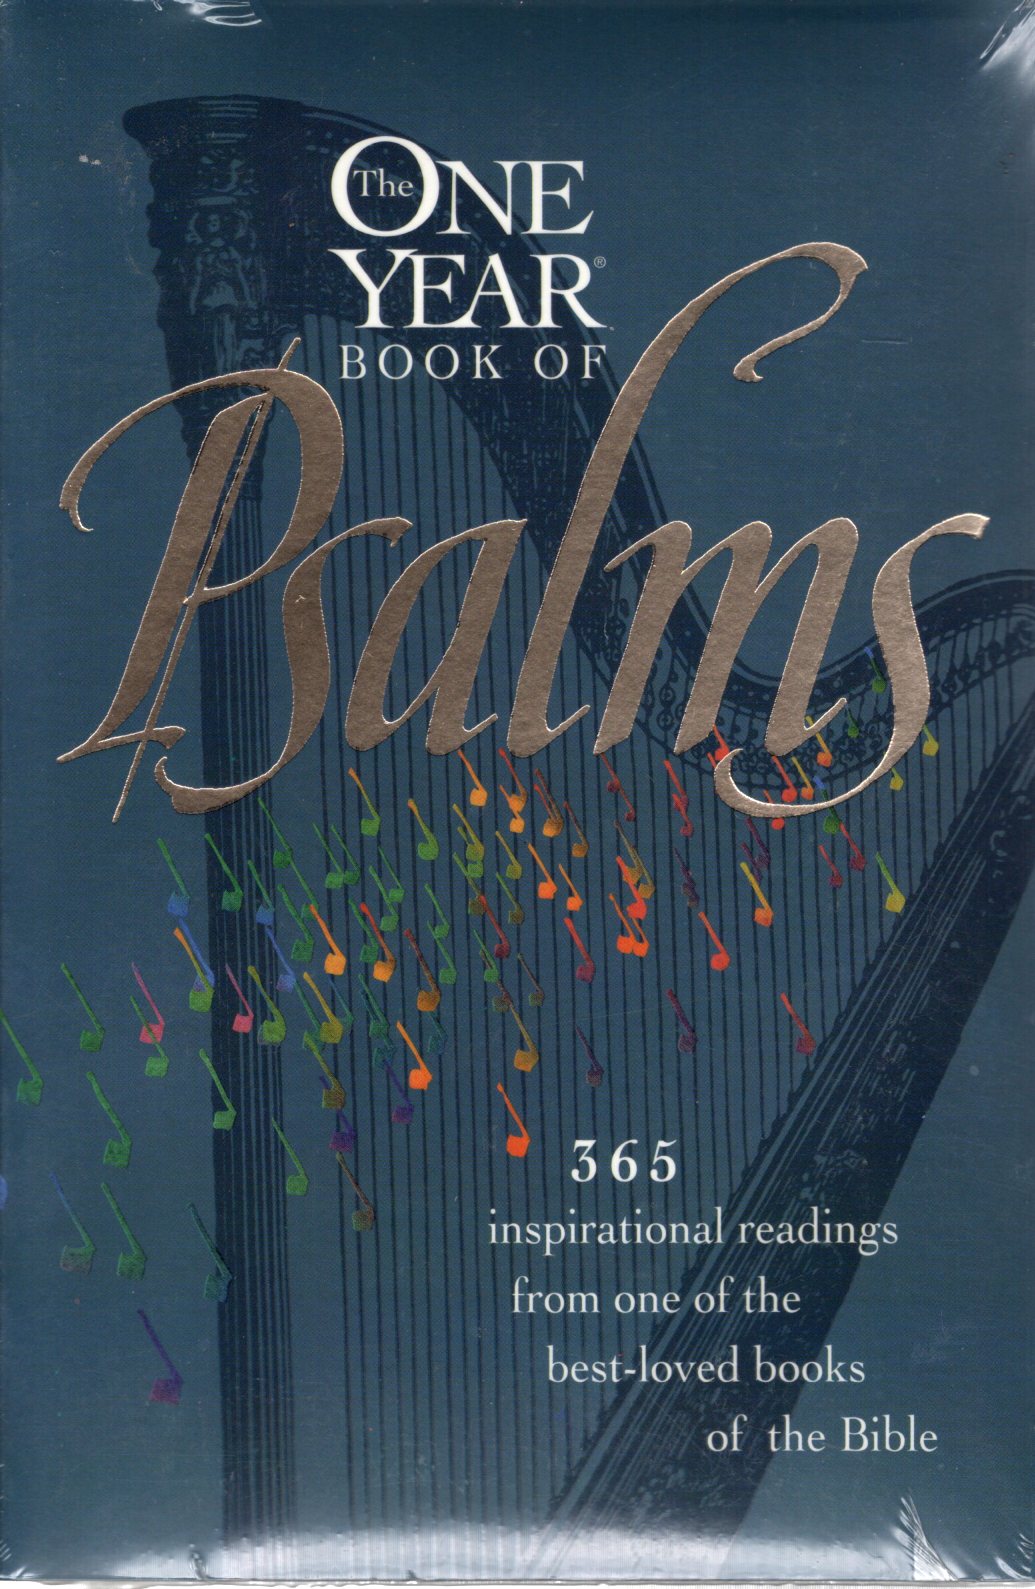 Tyndale Publishers - The One Year® Book of Psalms: 365 Inspirational Readings from One of the Best-Loved Books of the Bible - Softcover